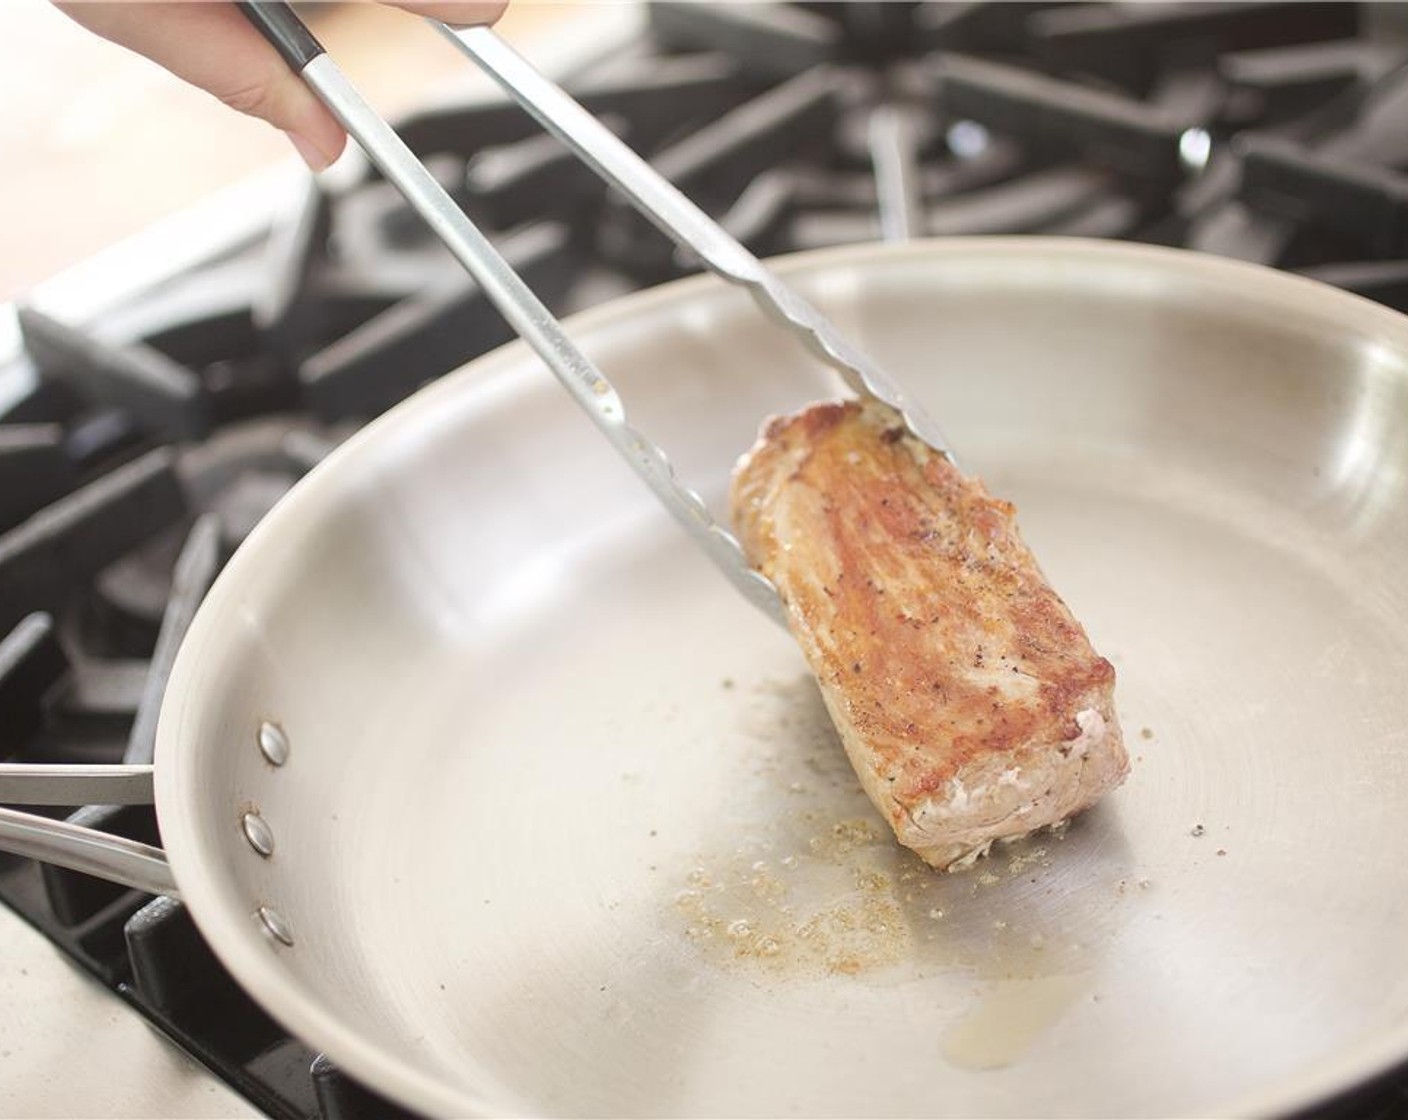 step 6 Pat the Pork Tenderloin (8 oz) dry with paper towels. Season with Salt (1/4 tsp) and Ground Black Pepper (1/4 tsp). In a large saute pan over medium high heat, add Olive Oil (1 Tbsp) and sear pork on all sides until deeply caramelized, two minutes on each side.